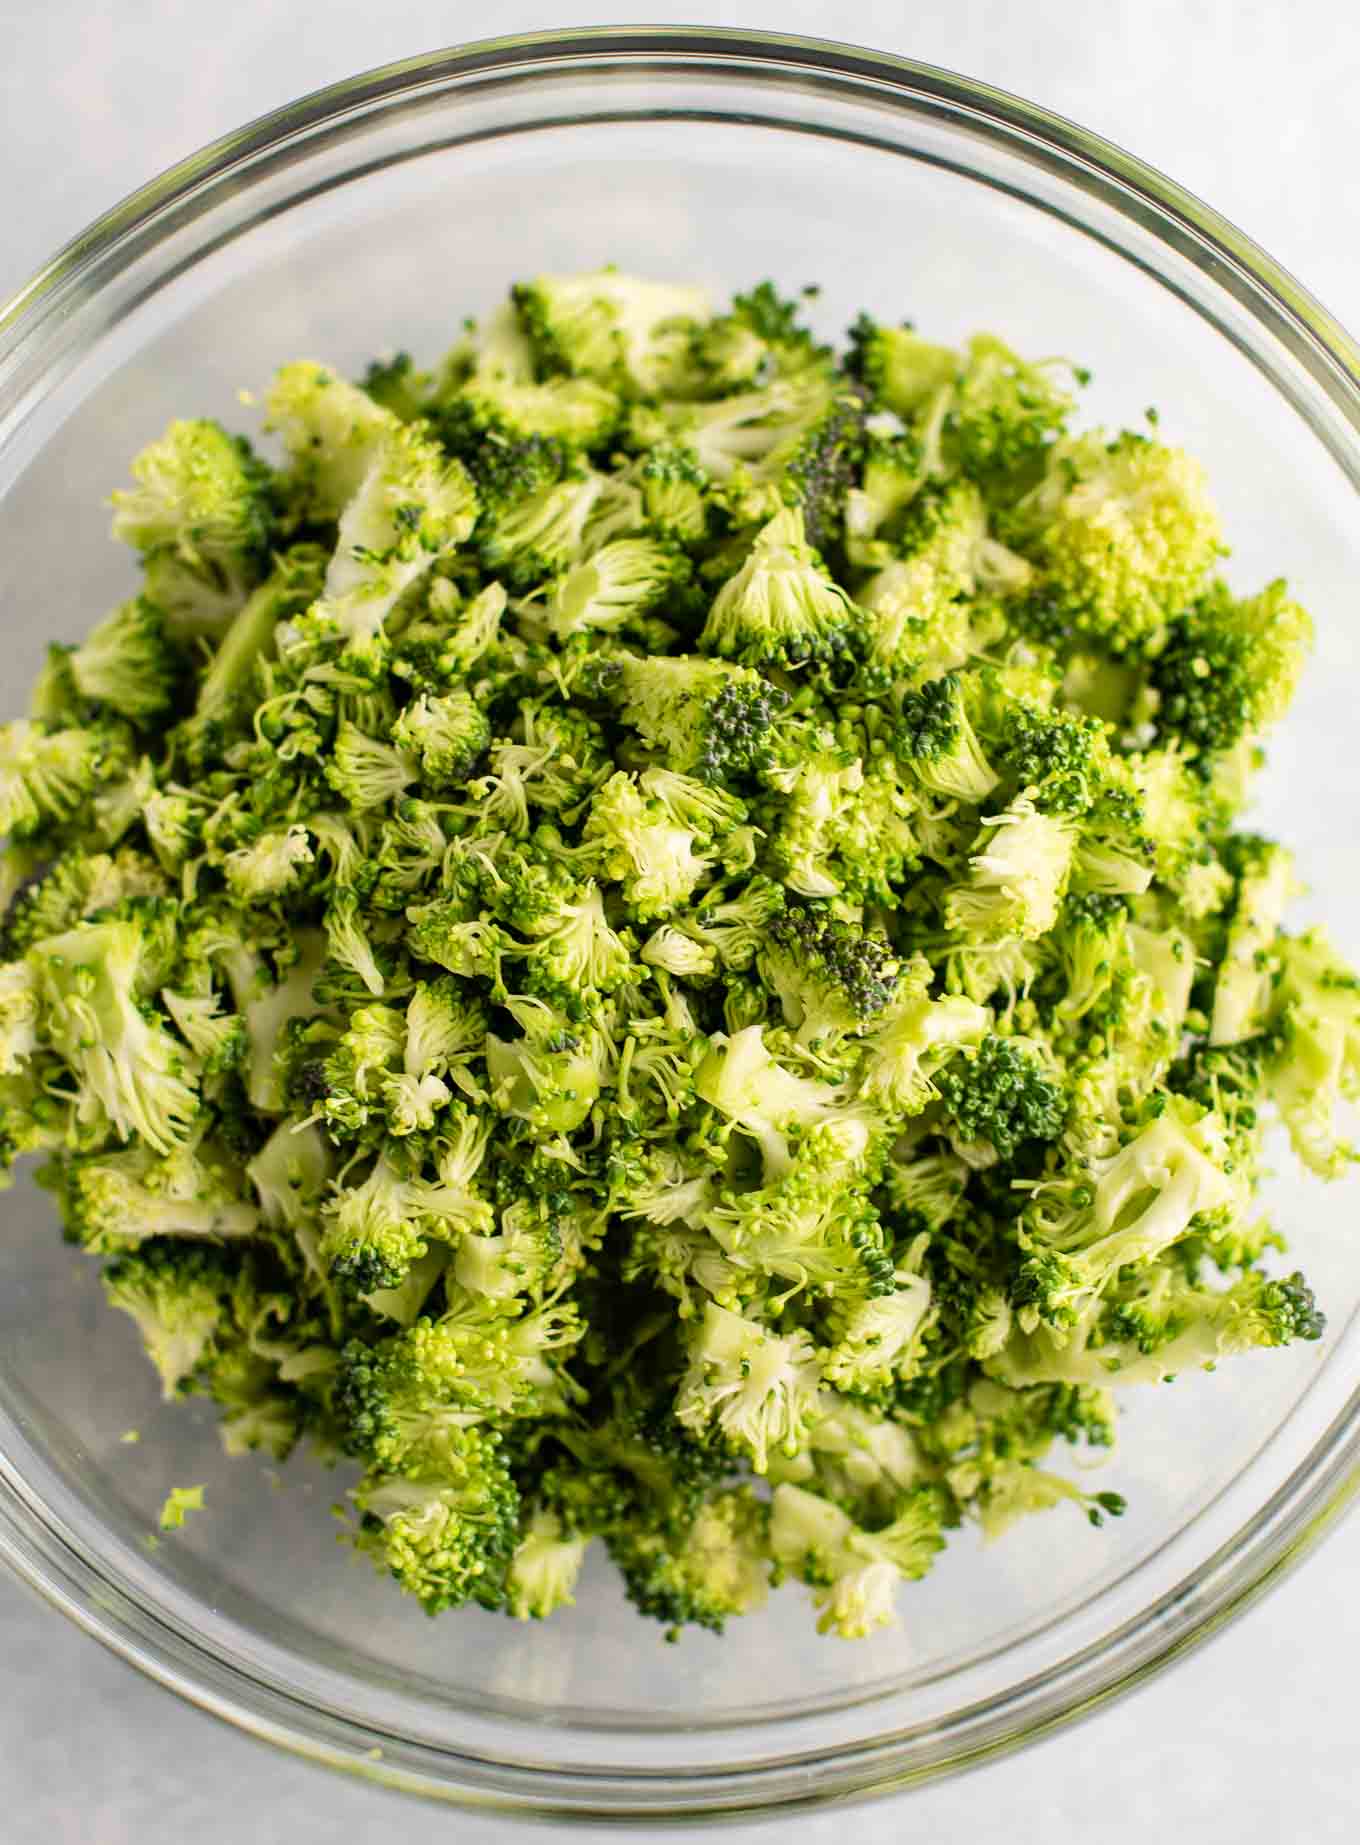 chopped up fresh broccoli in a clear bowl